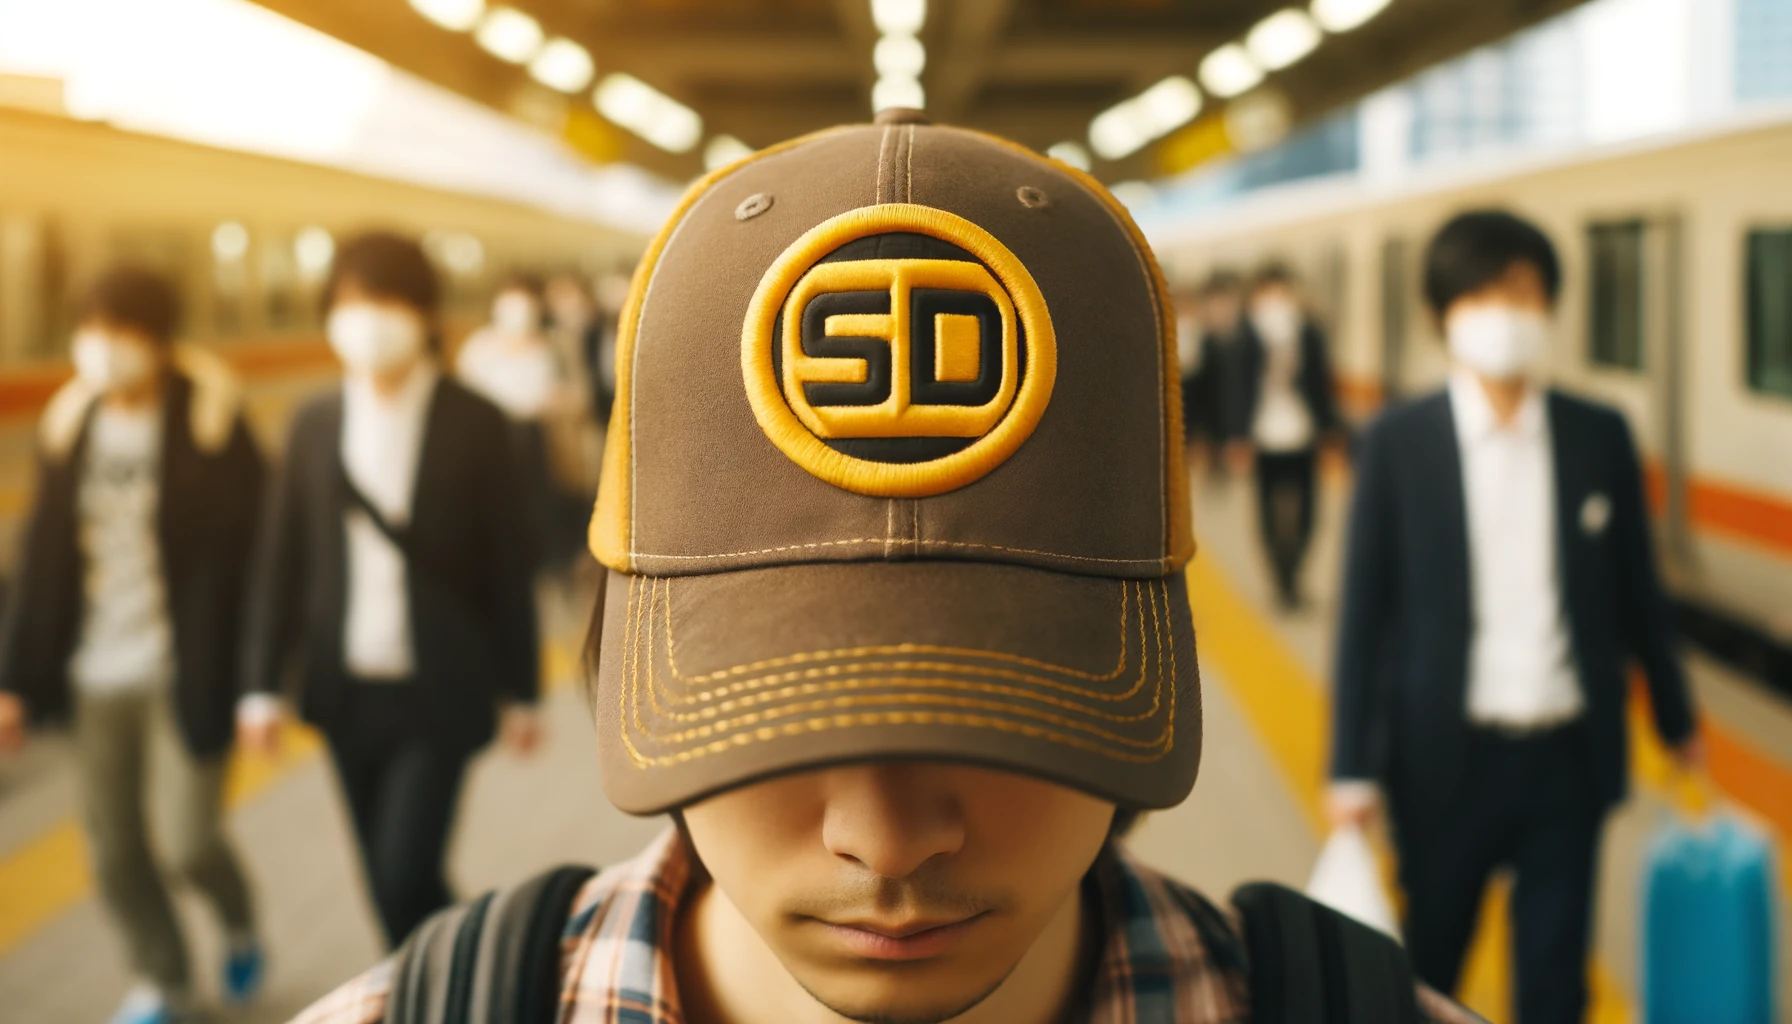 Japanese people using a cap with a large logo in yellow and brown in the center, SD letters included, with the front logo blurred, missing, or not visible. Horizontal aspect ratio (16:9).